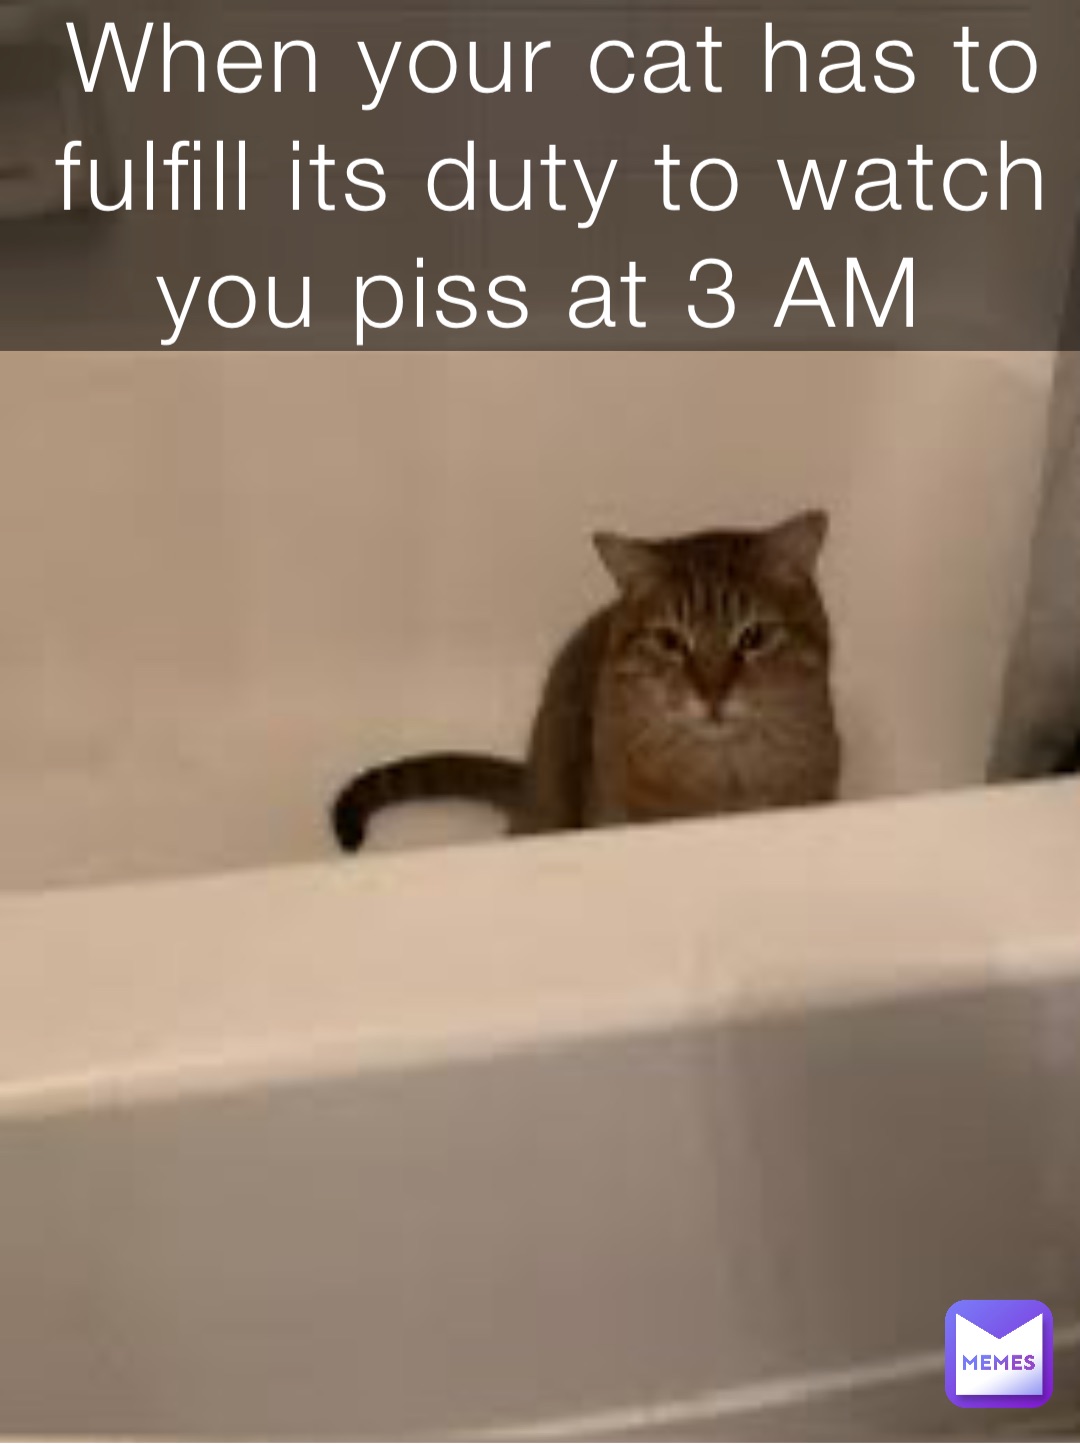 When your cat has to fulfill its duty to watch you piss at 3 AM